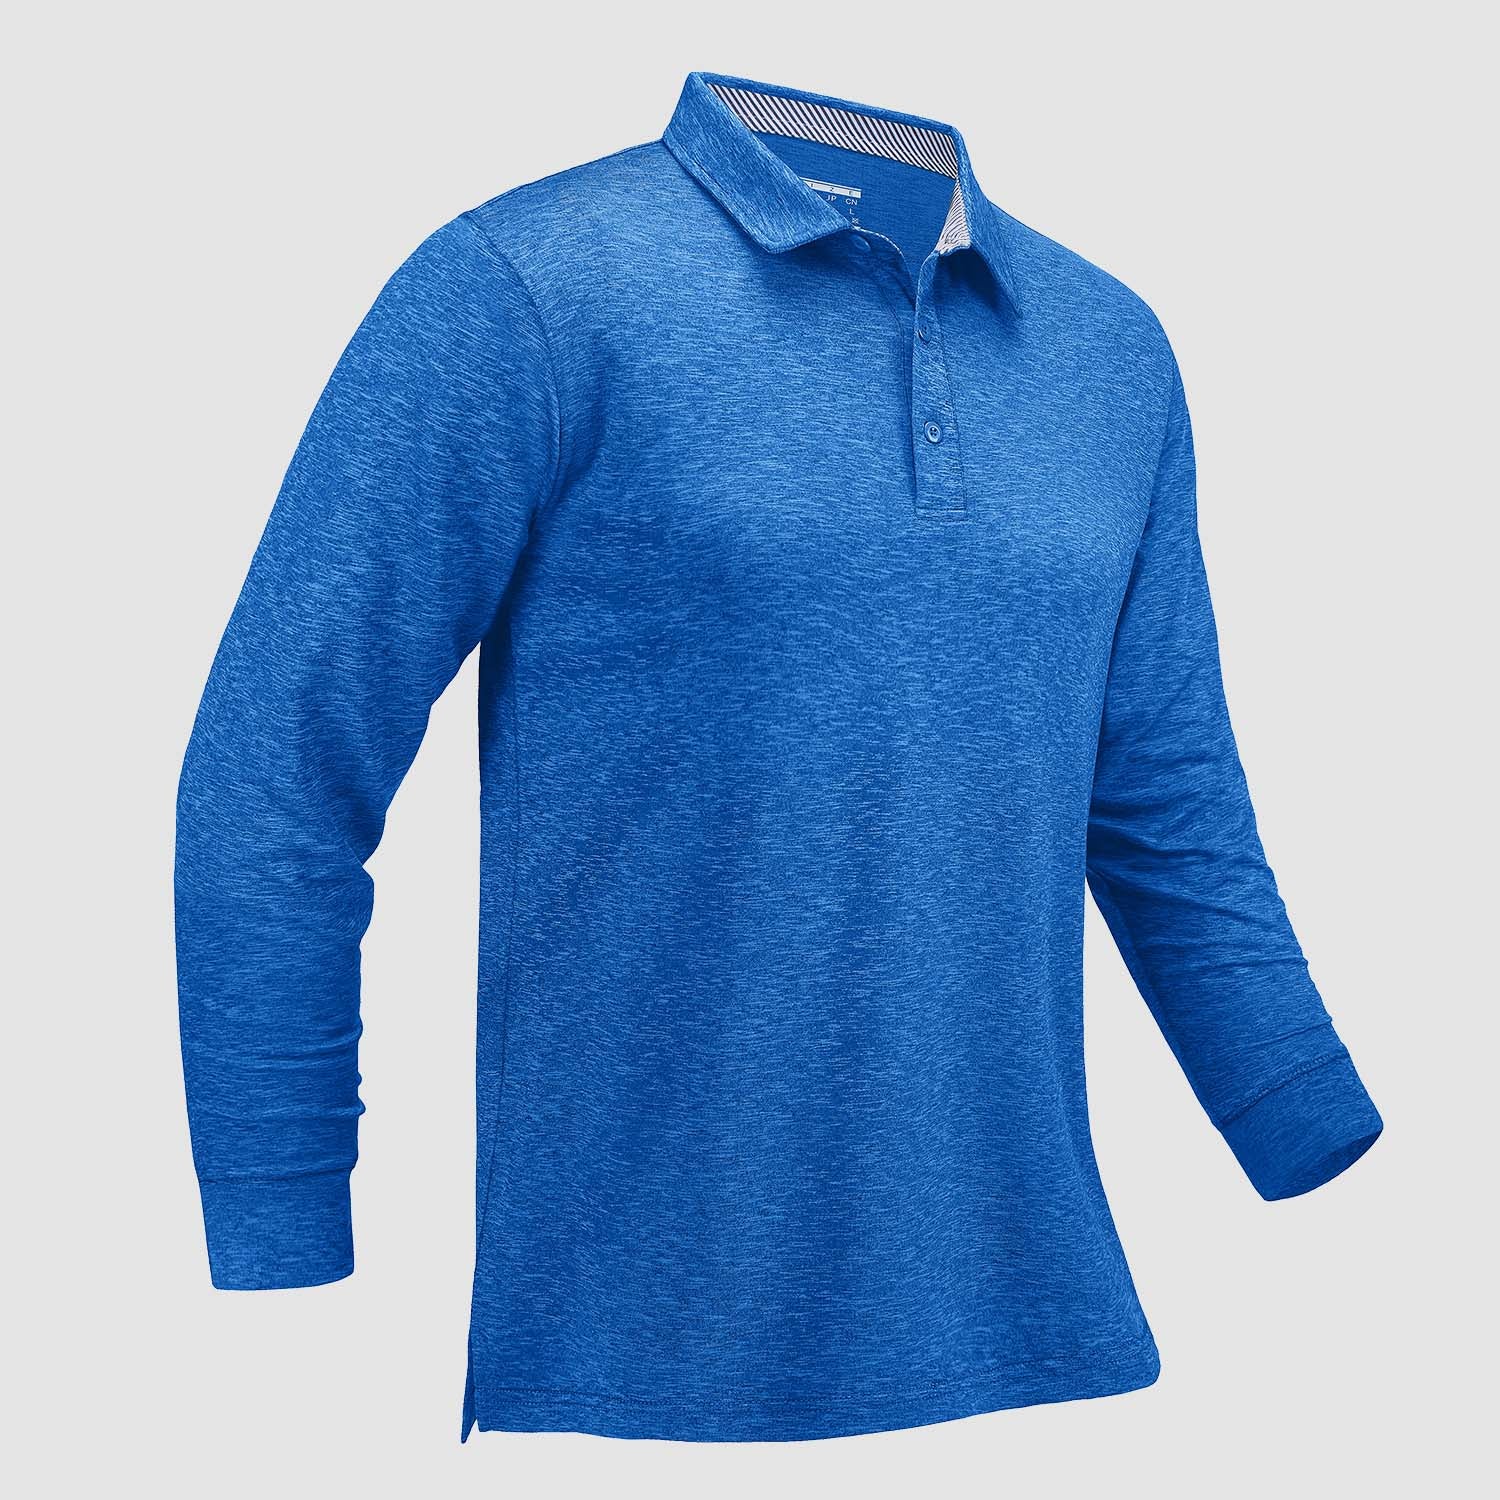 Men's Long Sleeve Golf Polo Shirts Collared Casual Athletic Quick Dry Shirts